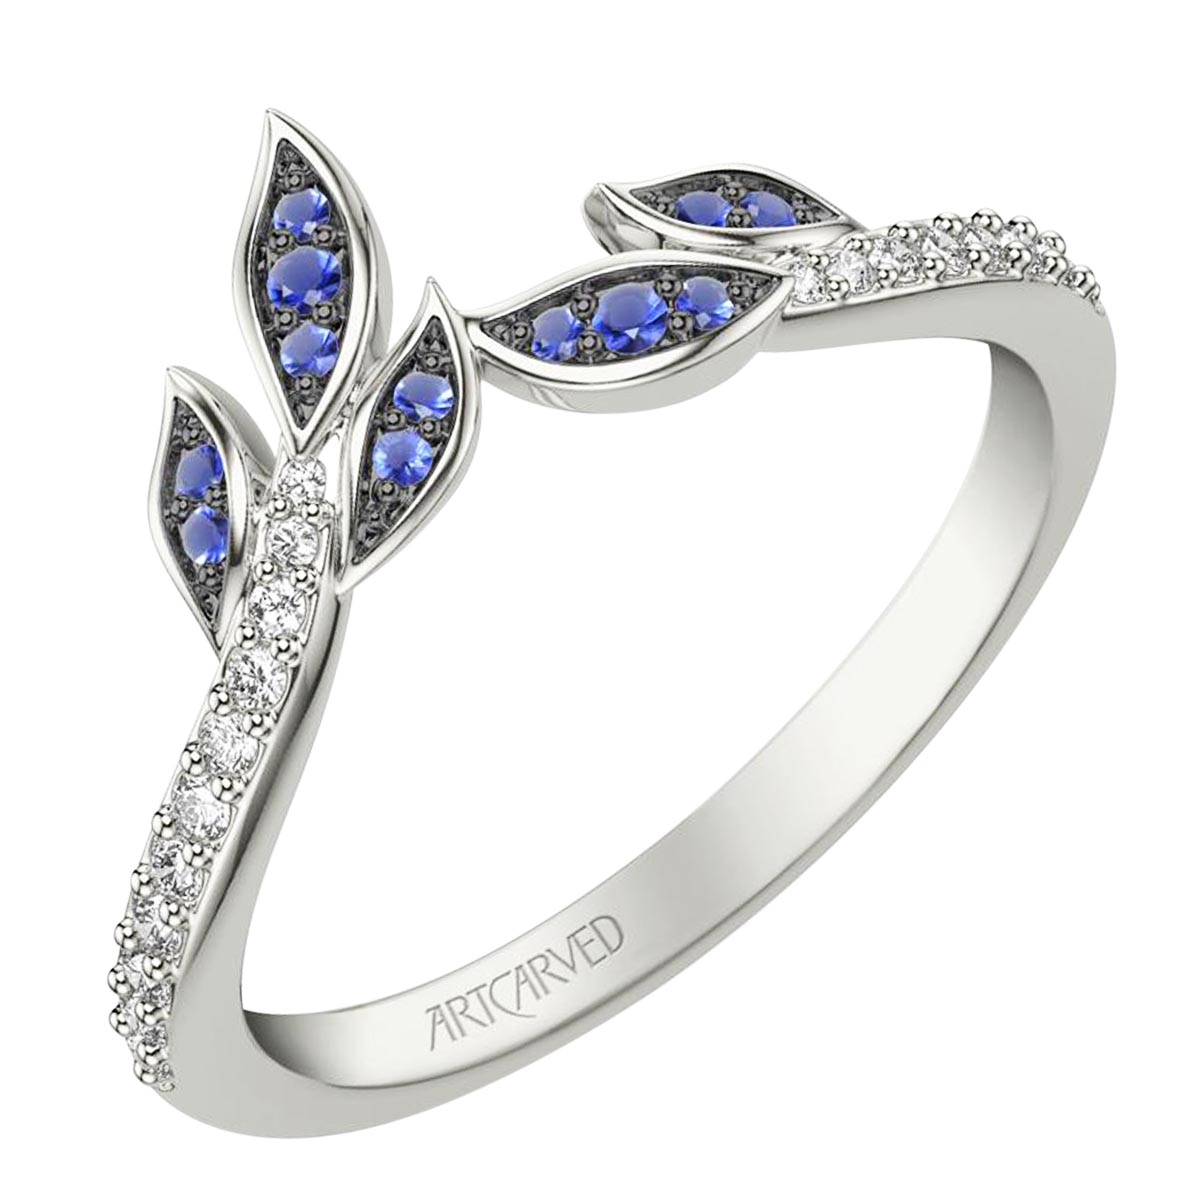 Artcarved Diamond and Sapphire Petal Band in 14kt White Gold